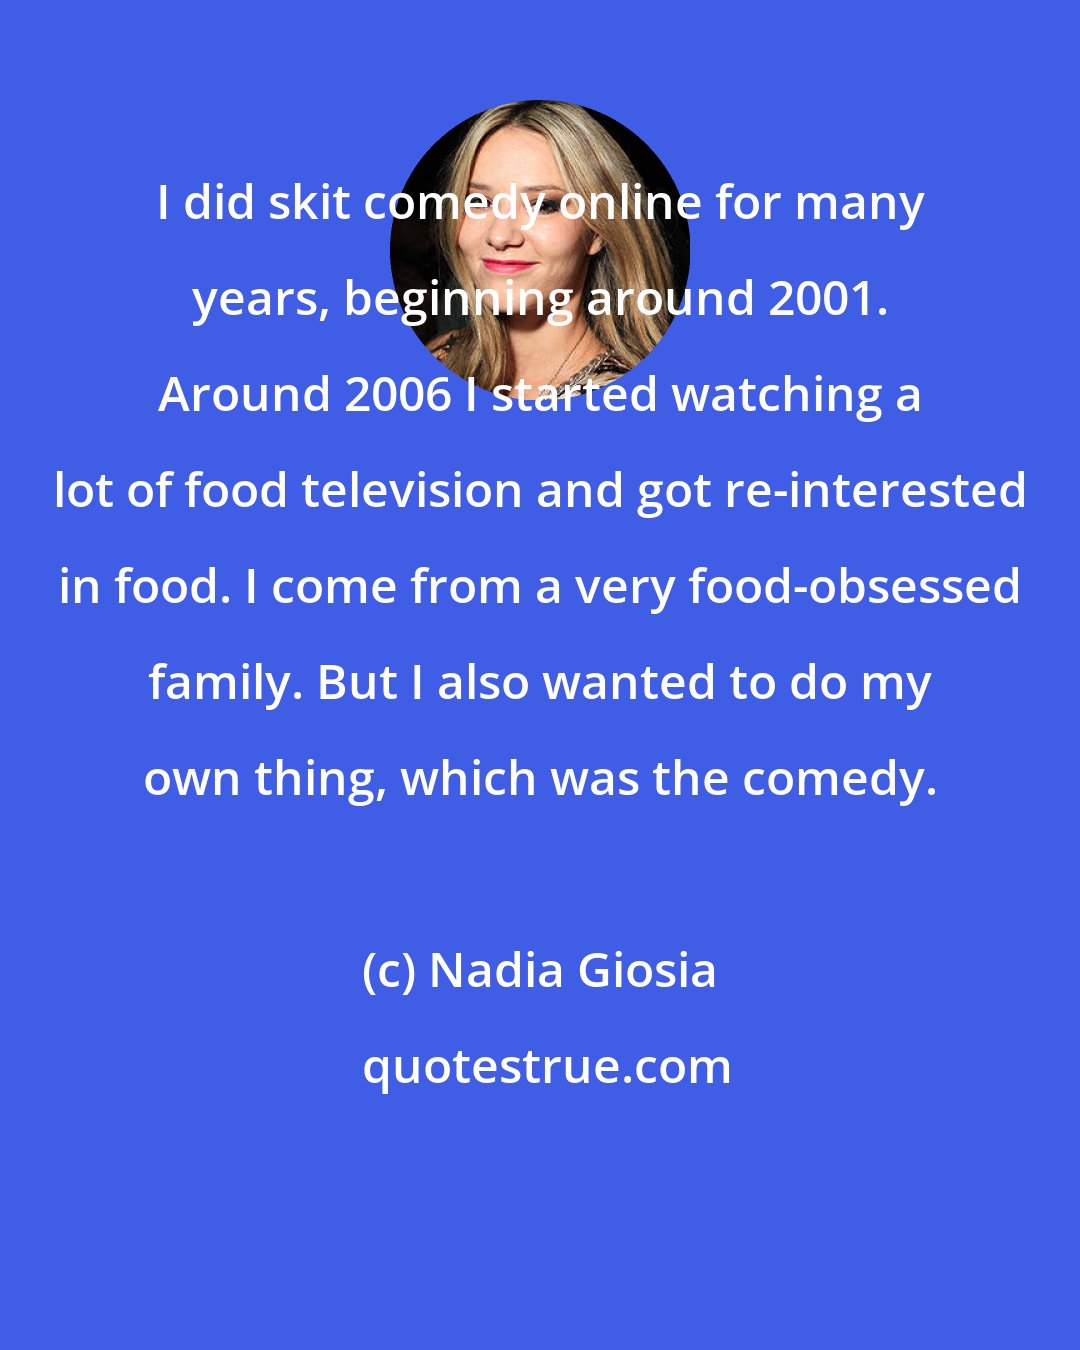 Nadia Giosia: I did skit comedy online for many years, beginning around 2001. Around 2006 I started watching a lot of food television and got re-interested in food. I come from a very food-obsessed family. But I also wanted to do my own thing, which was the comedy.